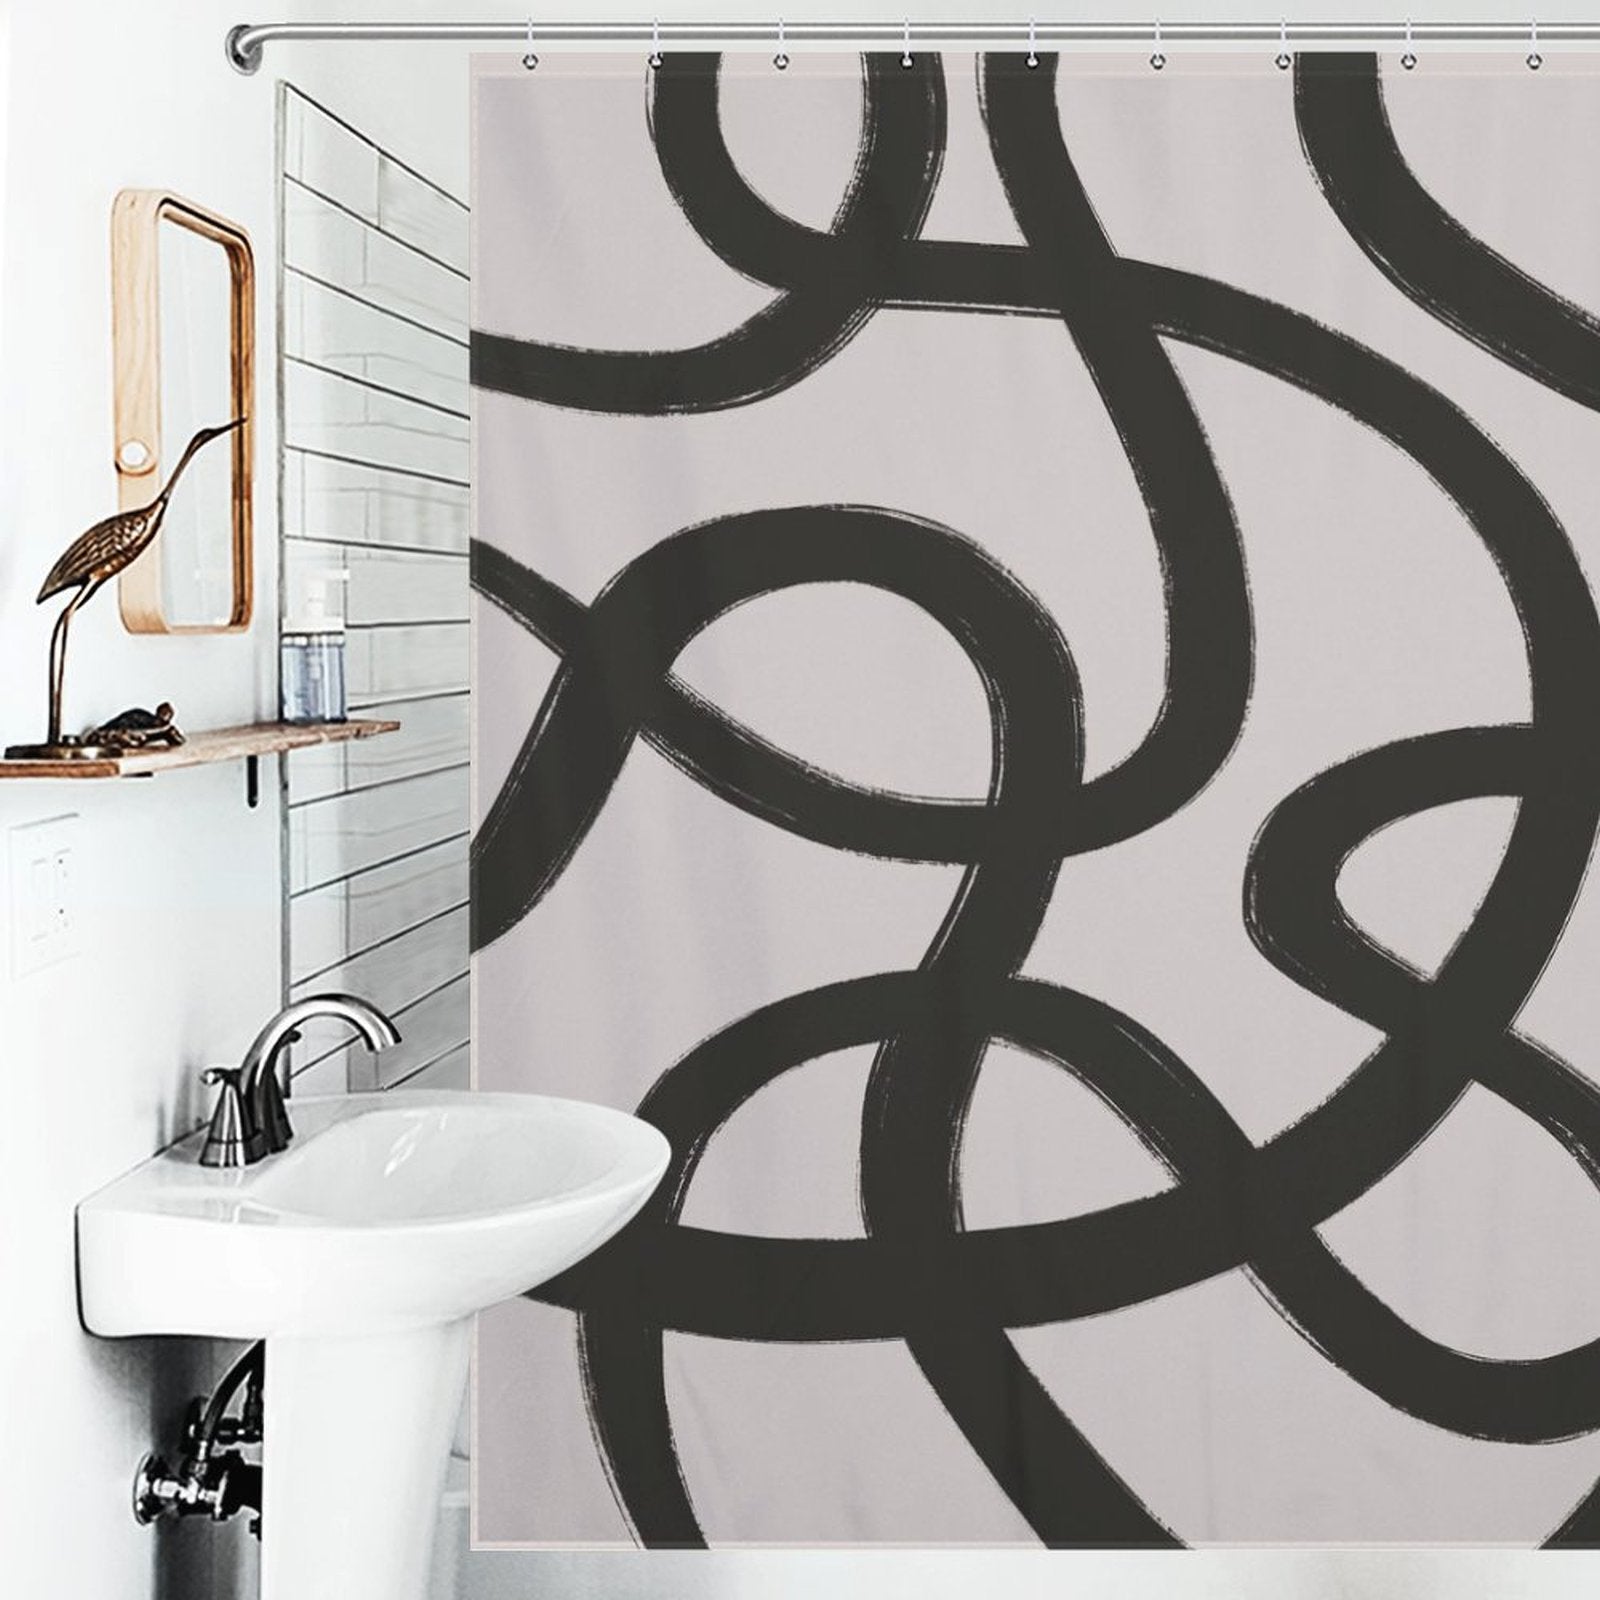 A bathroom with a white sink and a mirror on the wall features the Cotton Cat Modern Geometric Art Minimalist Curve Black Line Black and Grey Abstract Shower Curtain-Cottoncat, adding a touch of modern geometric art.